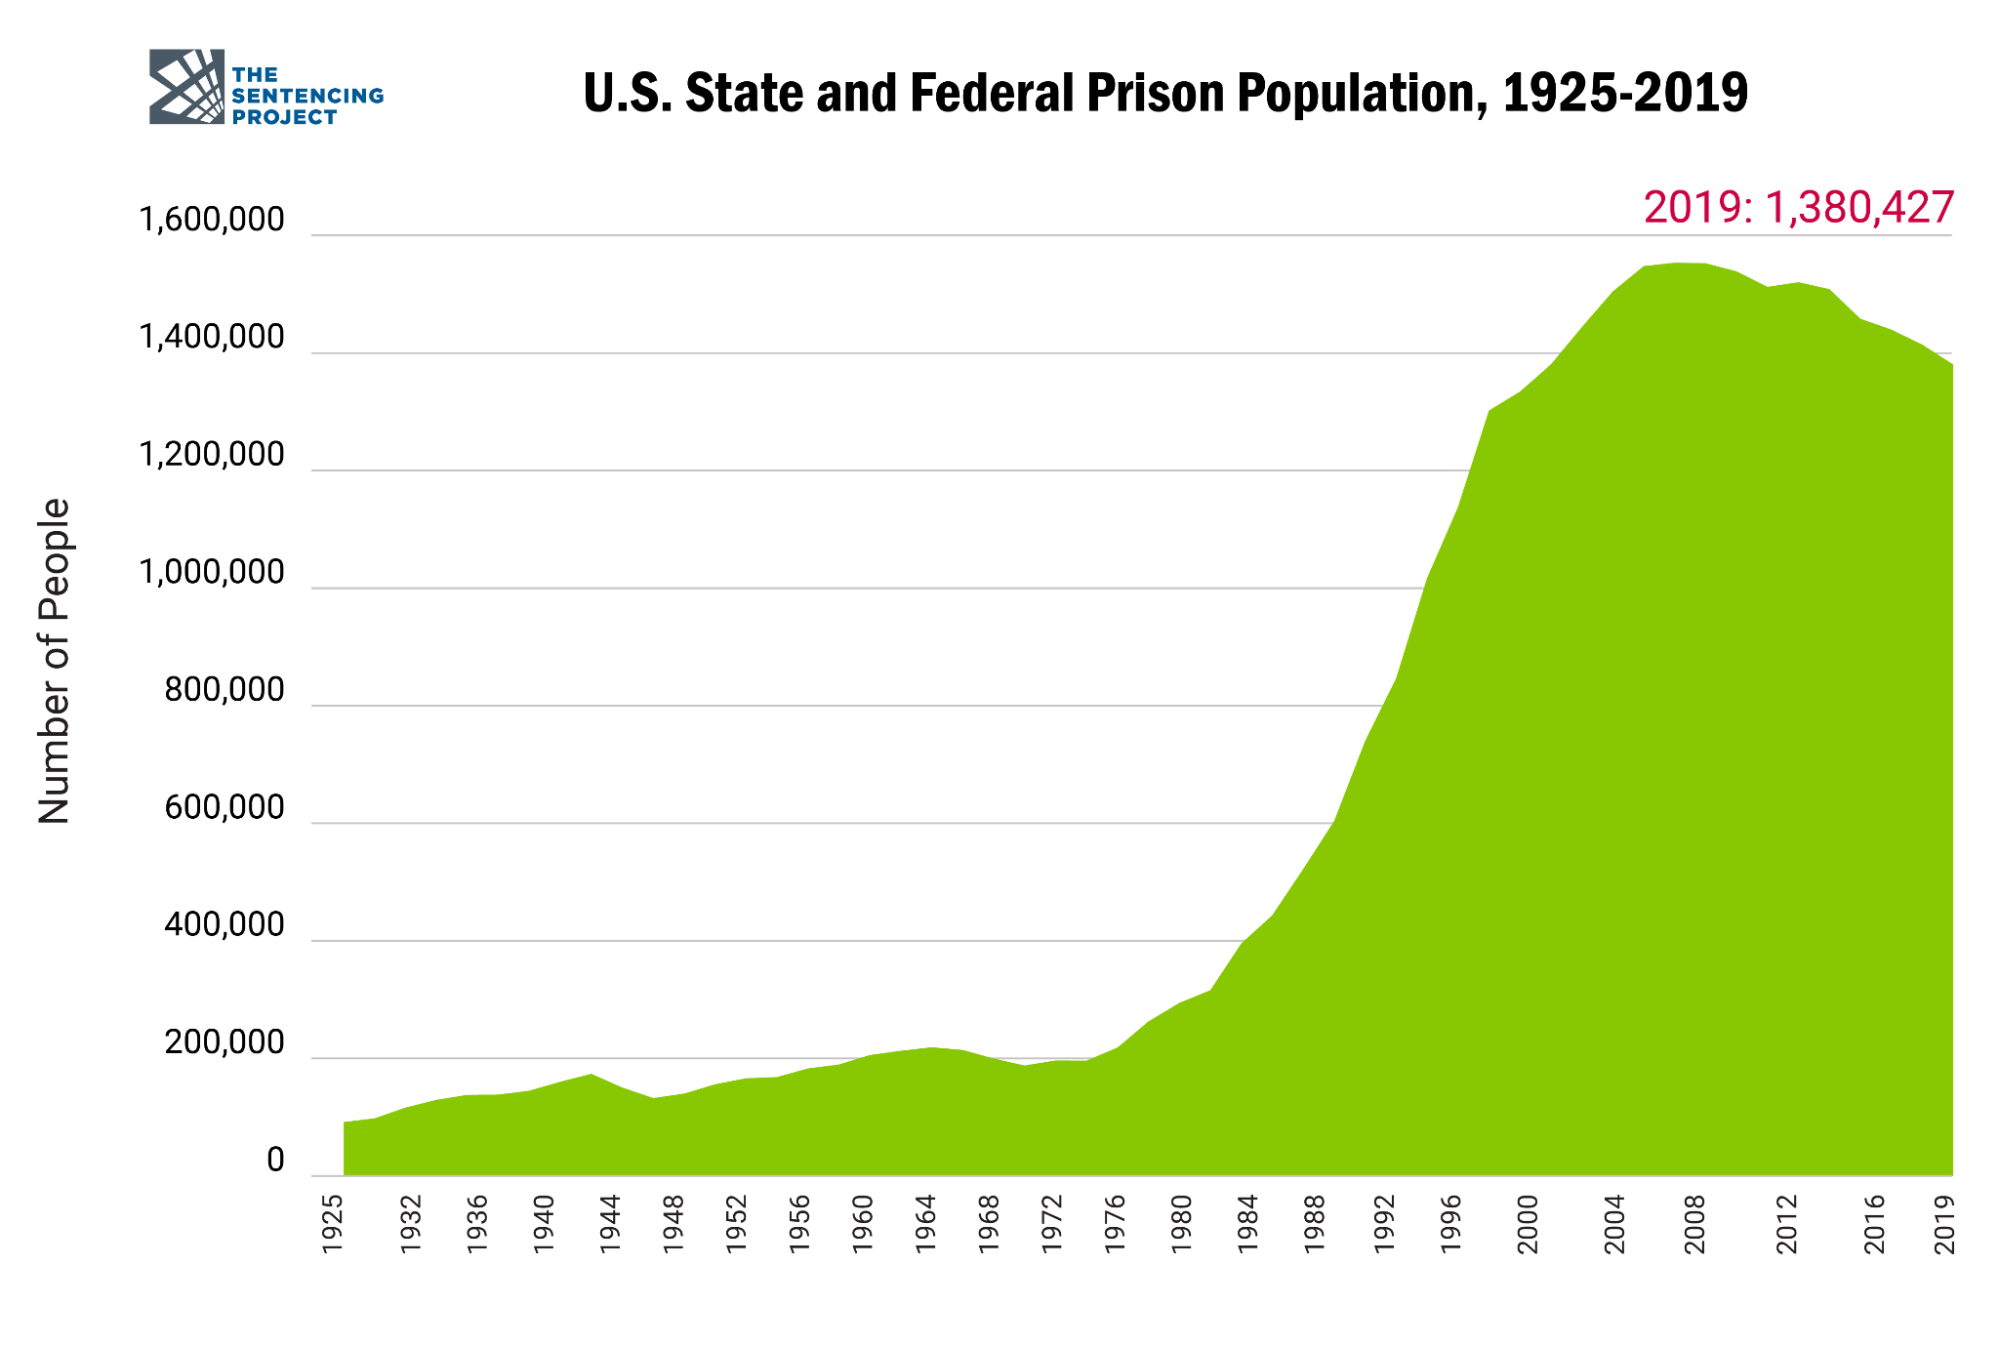 Graph showing the U.S. prison population in state and federal facilities from 1925 to 2019. Specifically noting the spike that occurred in the late 1980s and 1990s.